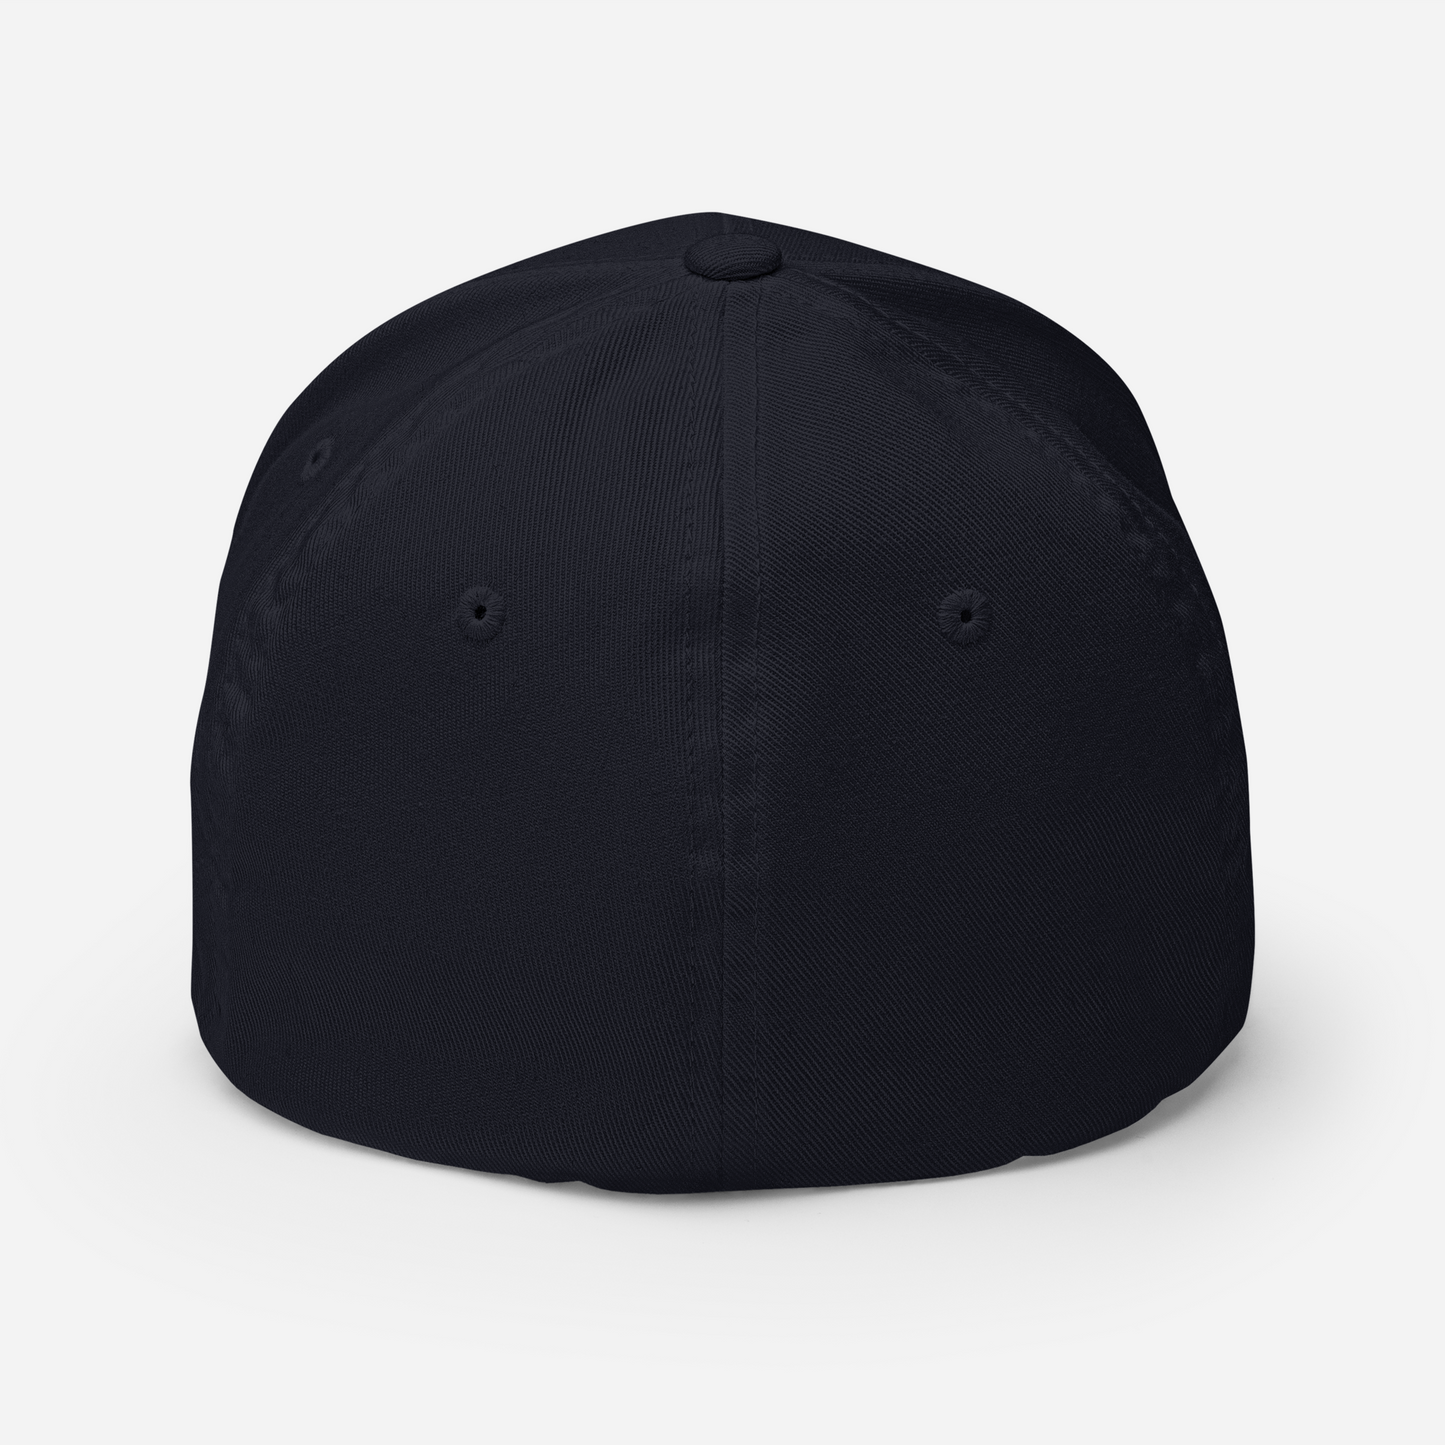 Away From The Mire FlexFit Structured Twill Cap | BMFS 33 Inspired Cap